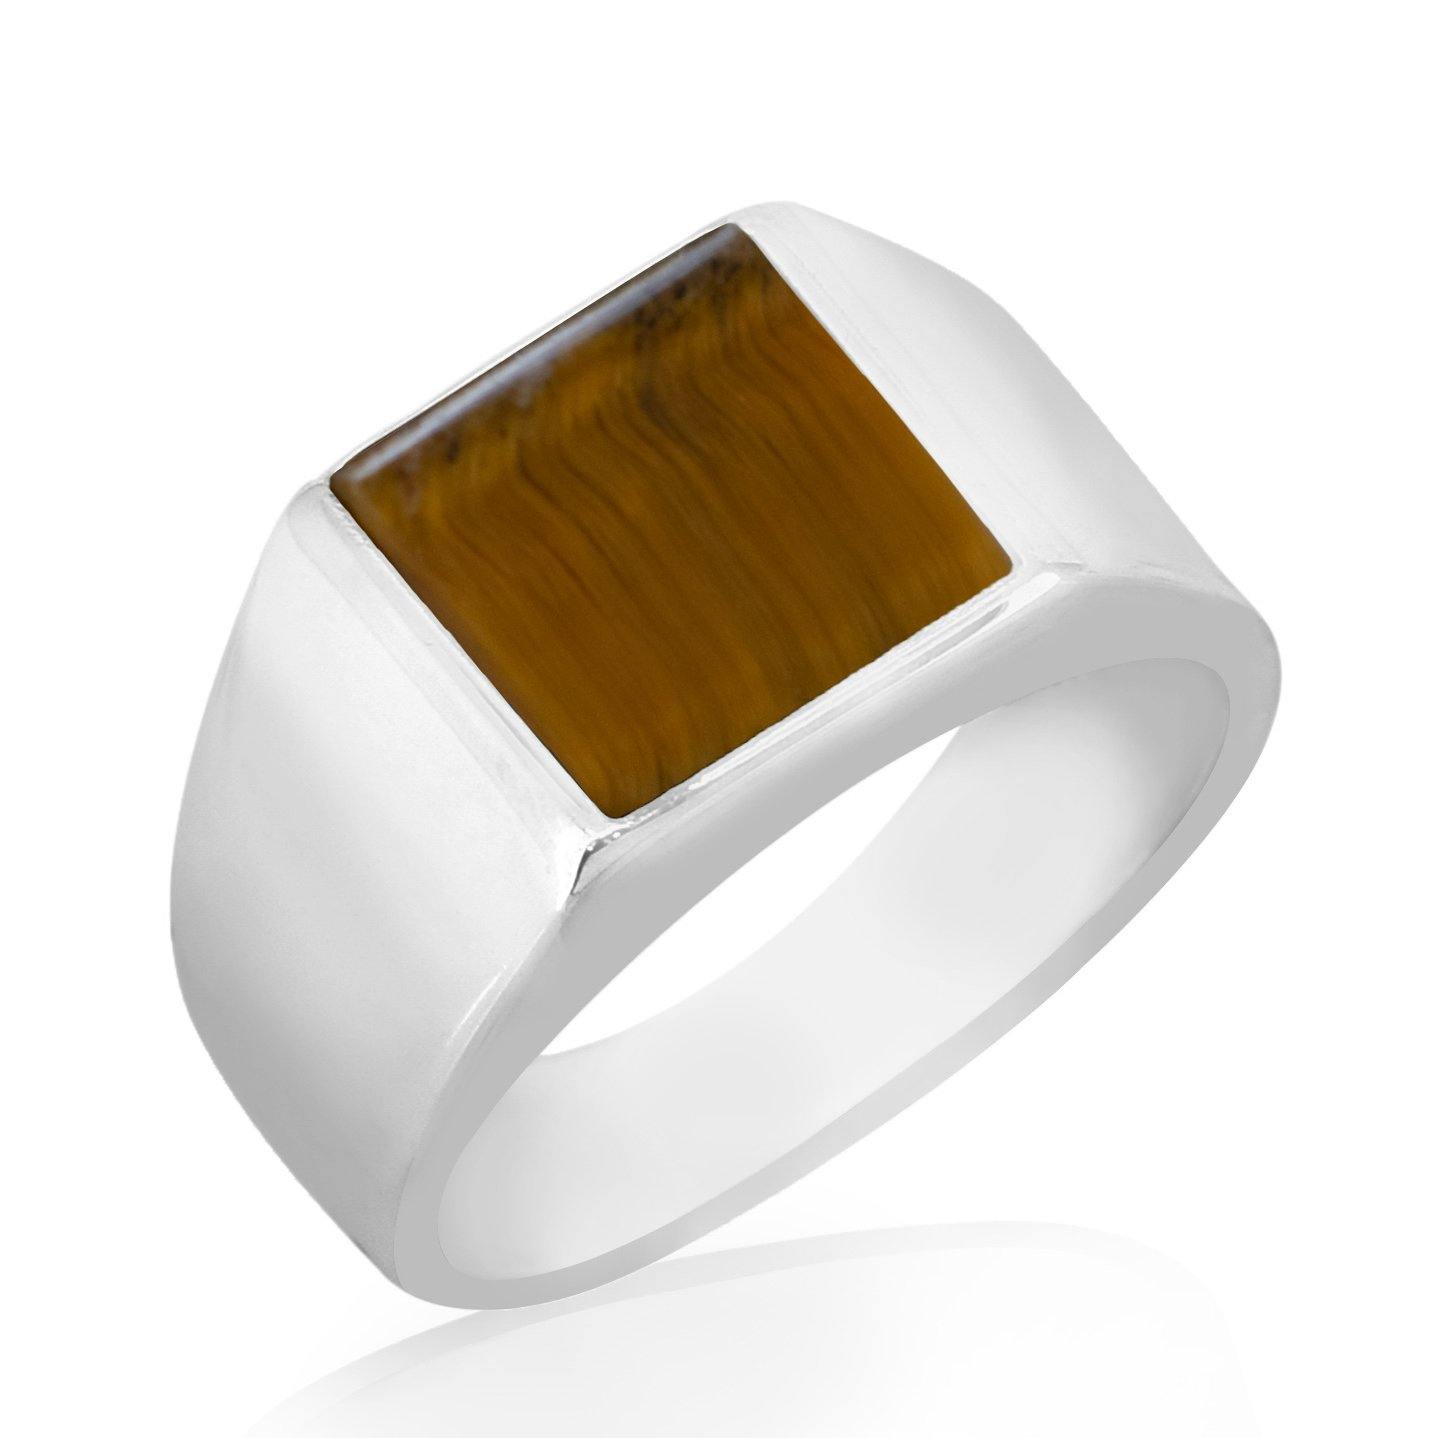 Tiger Eye Solid 925 Sterling Silver Ring Men's Jewelry - YoTreasure